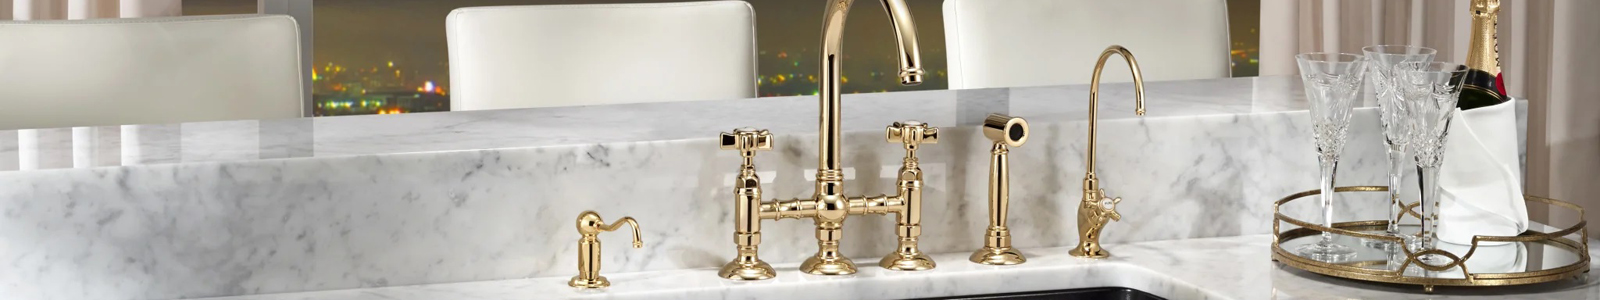 Rohl Faucet Banner